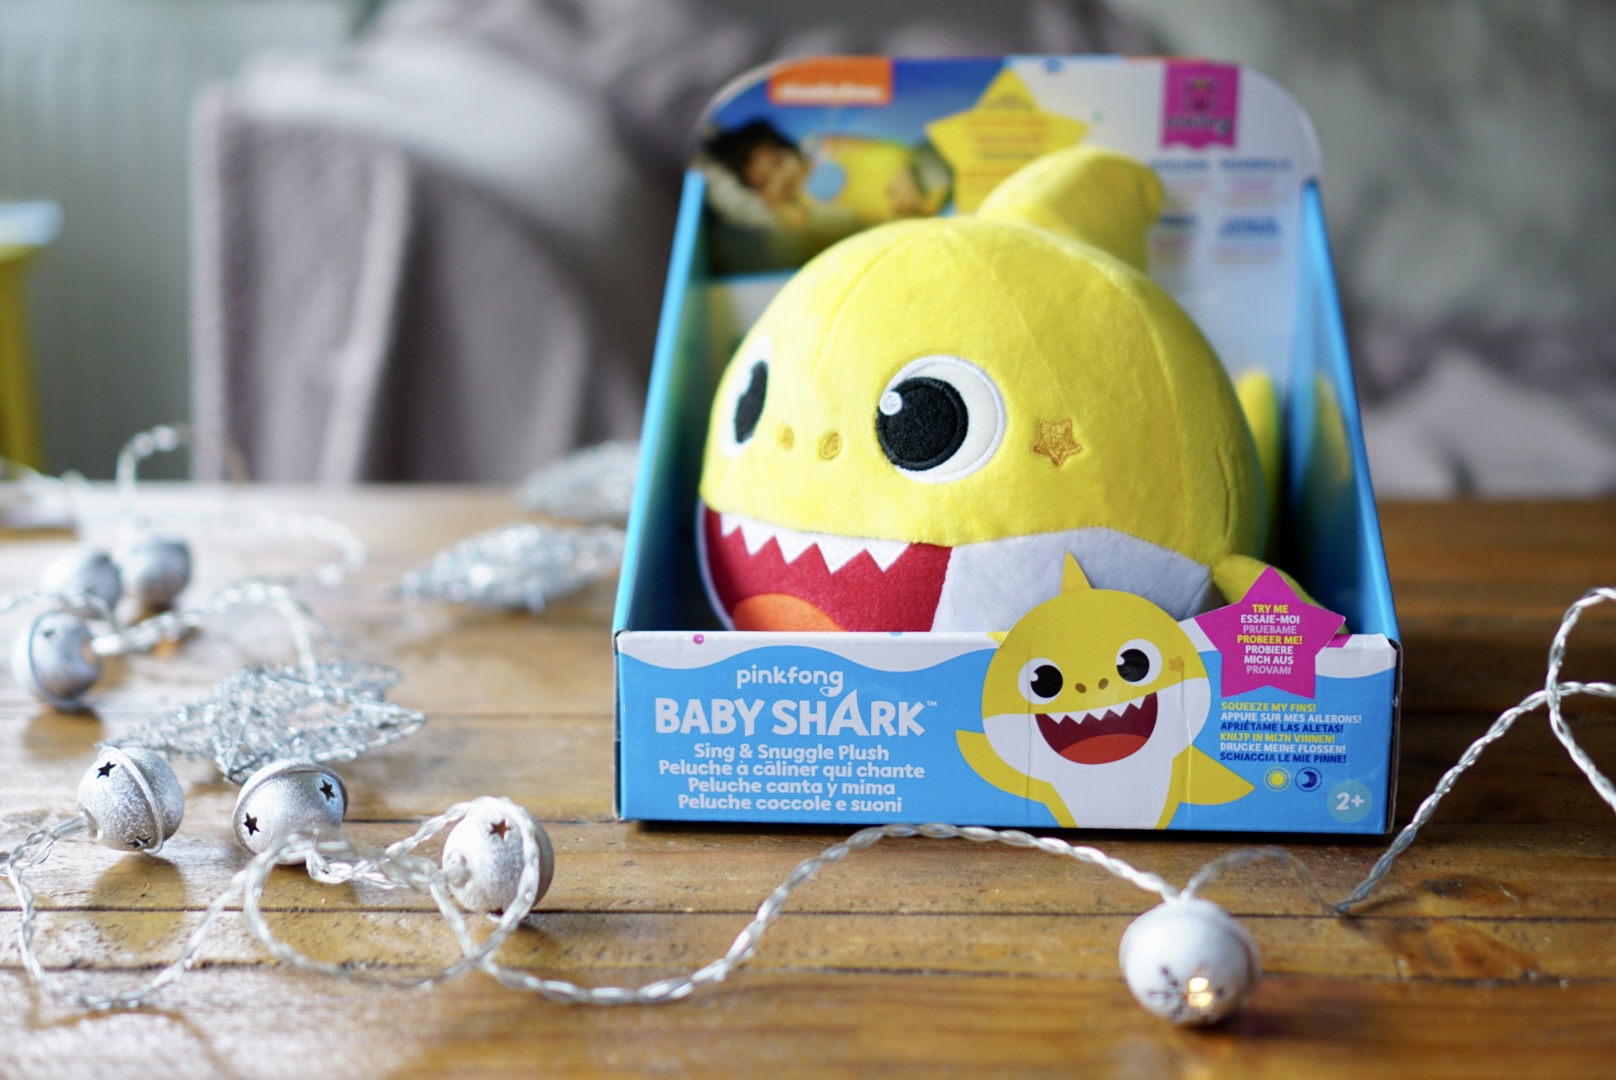 Baby Shark Plush toys for ages 3-8